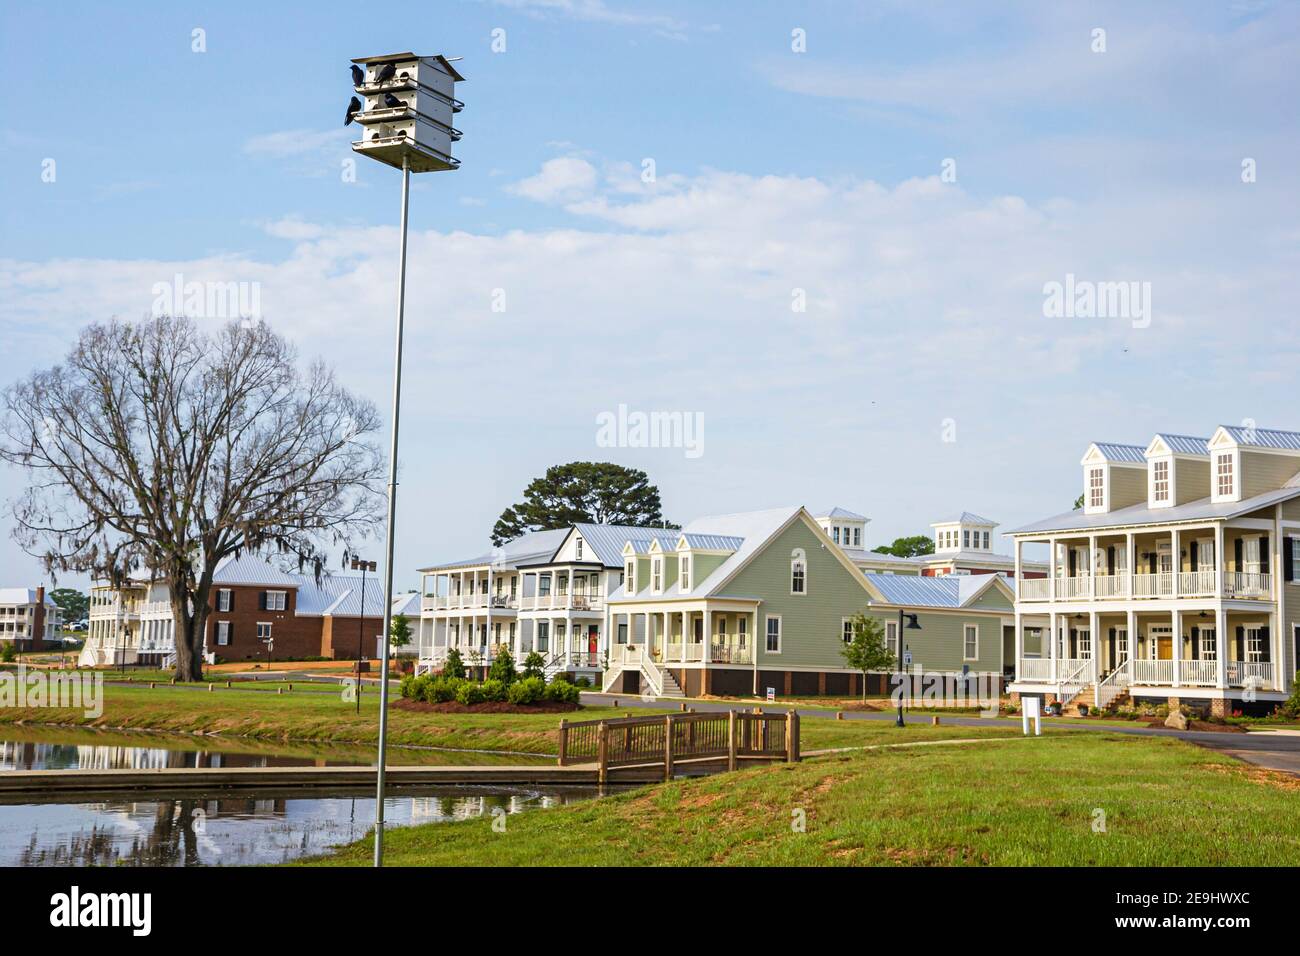 Alabama Montgomeery Pike Road The Waters planned community homes,traditional Americana architecture porch exterior birdhouse, Stock Photo